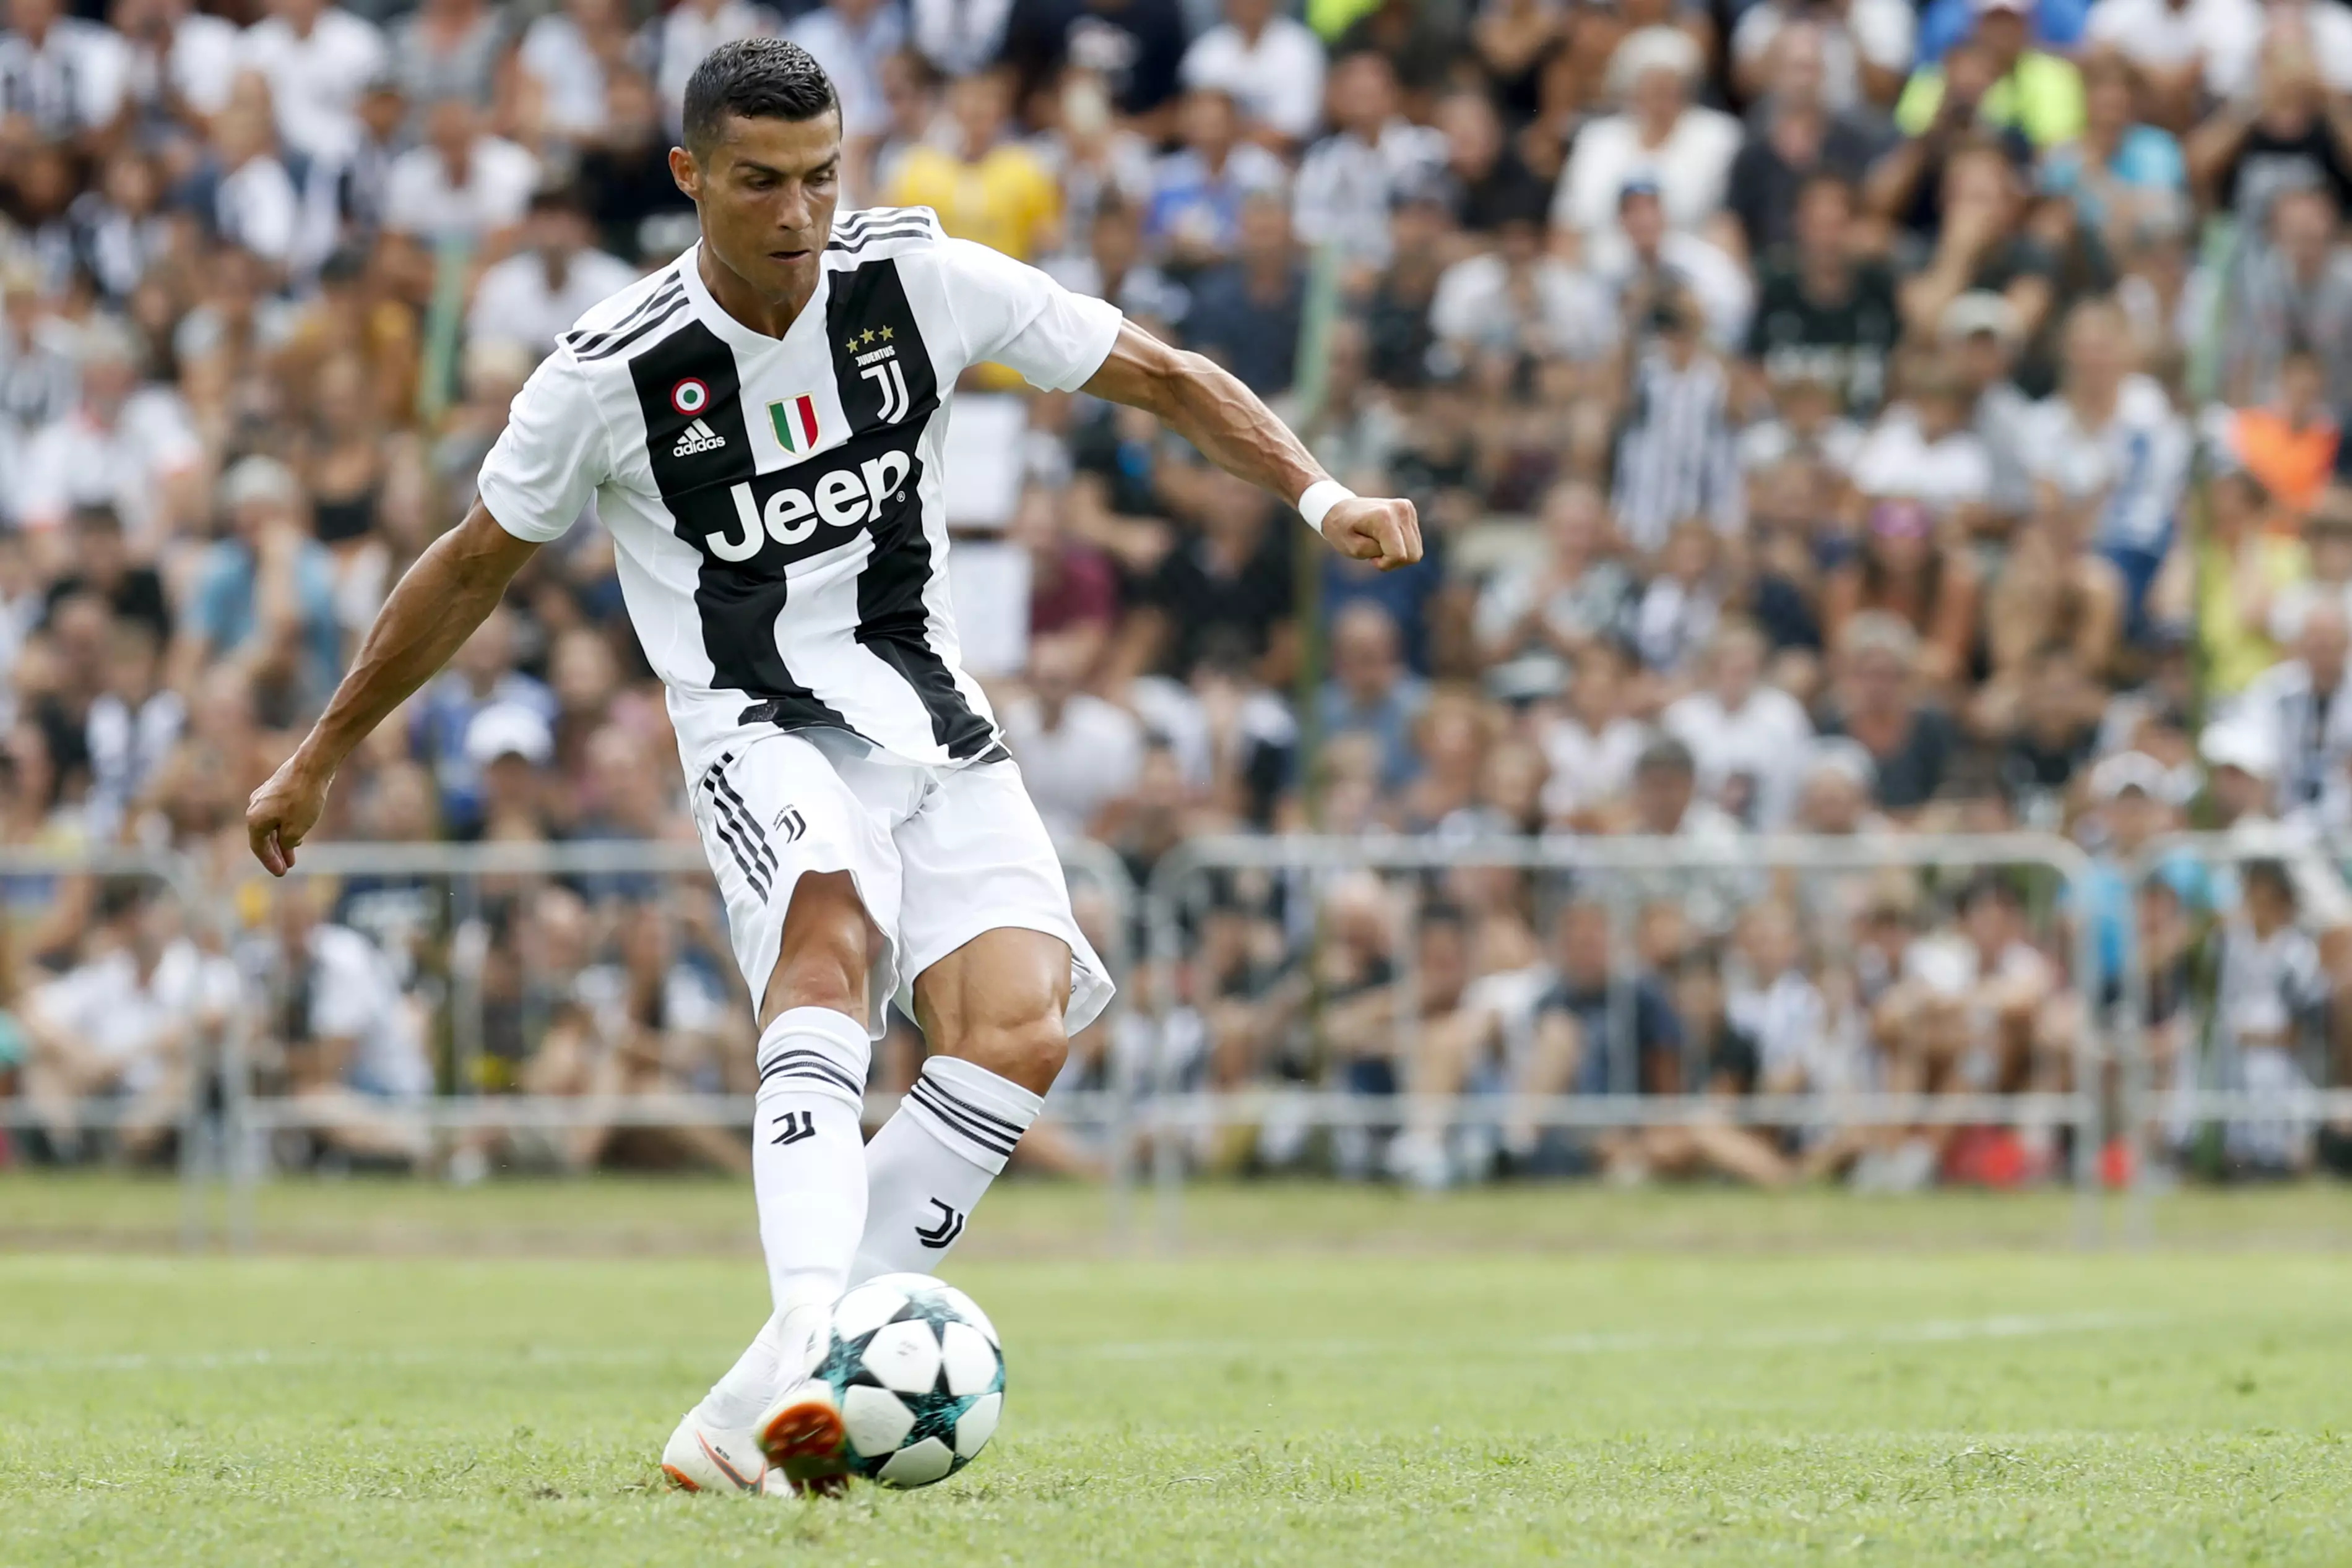 Juventus will be hoping Ronaldo can lead them to European success. Image: PA Images